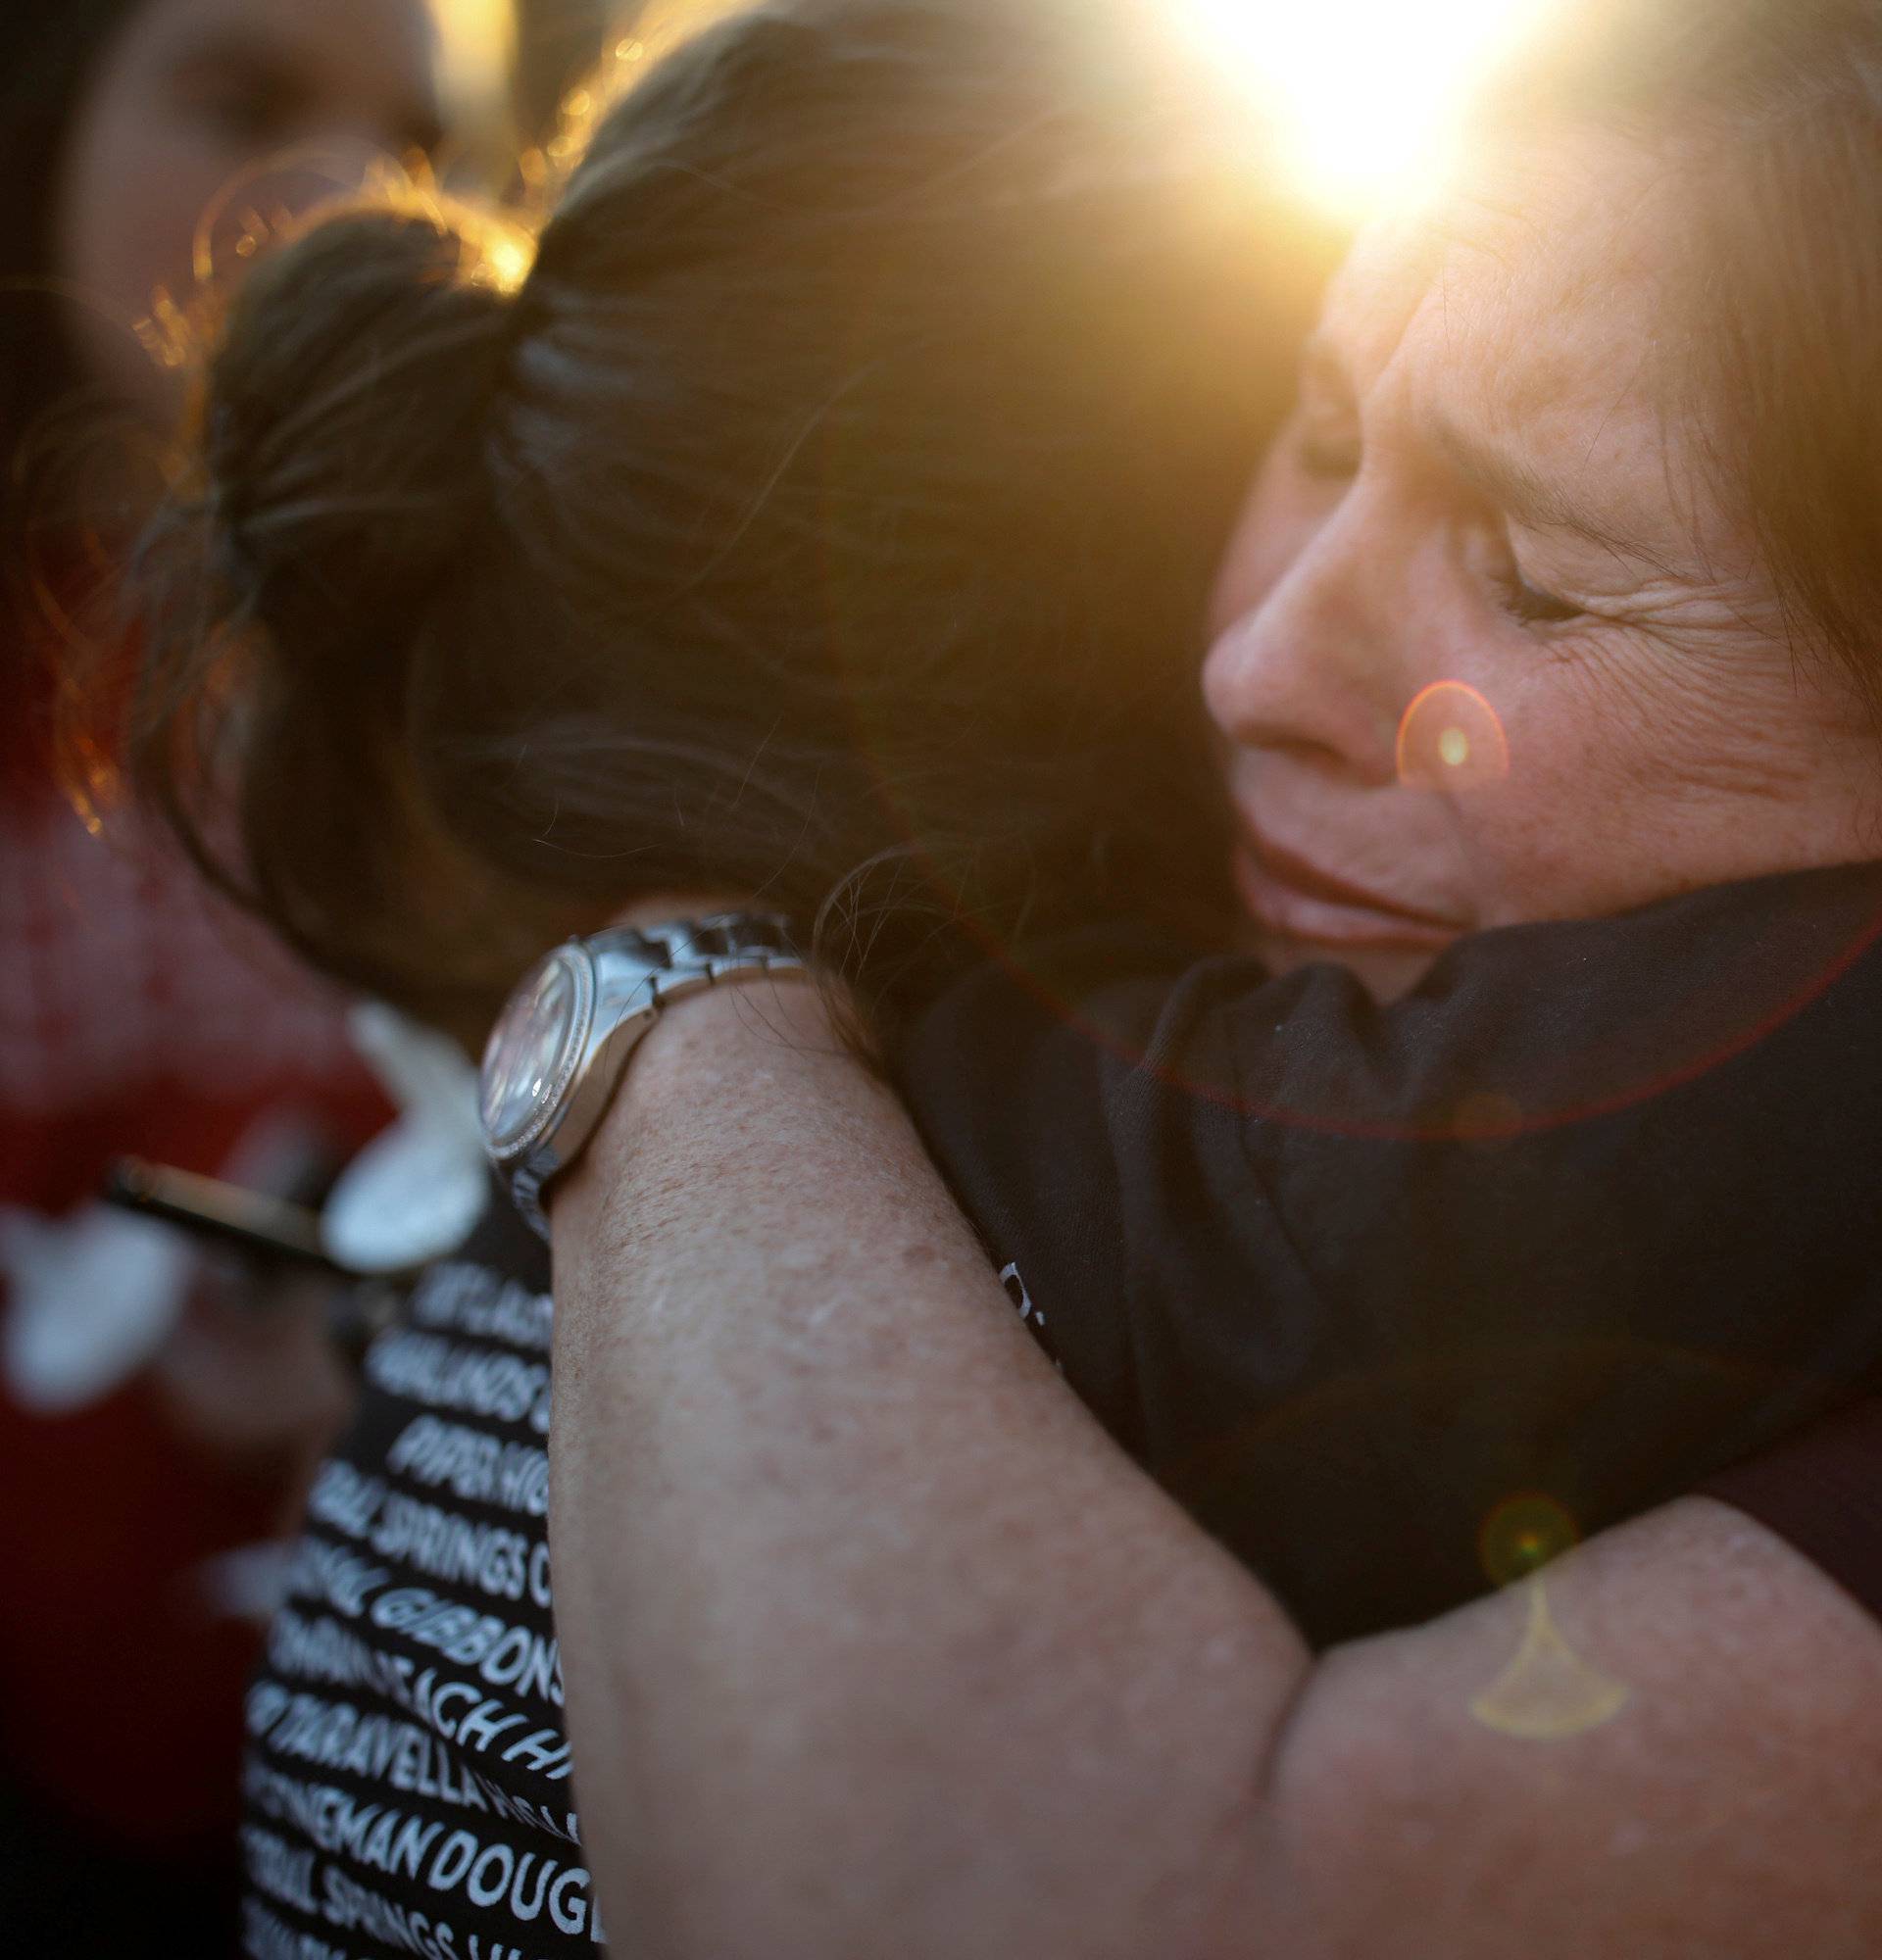 Women react during a candlelight vigil for victims of yesterday's shooting at nearby Marjory Stoneman Douglas High School, in Parkland